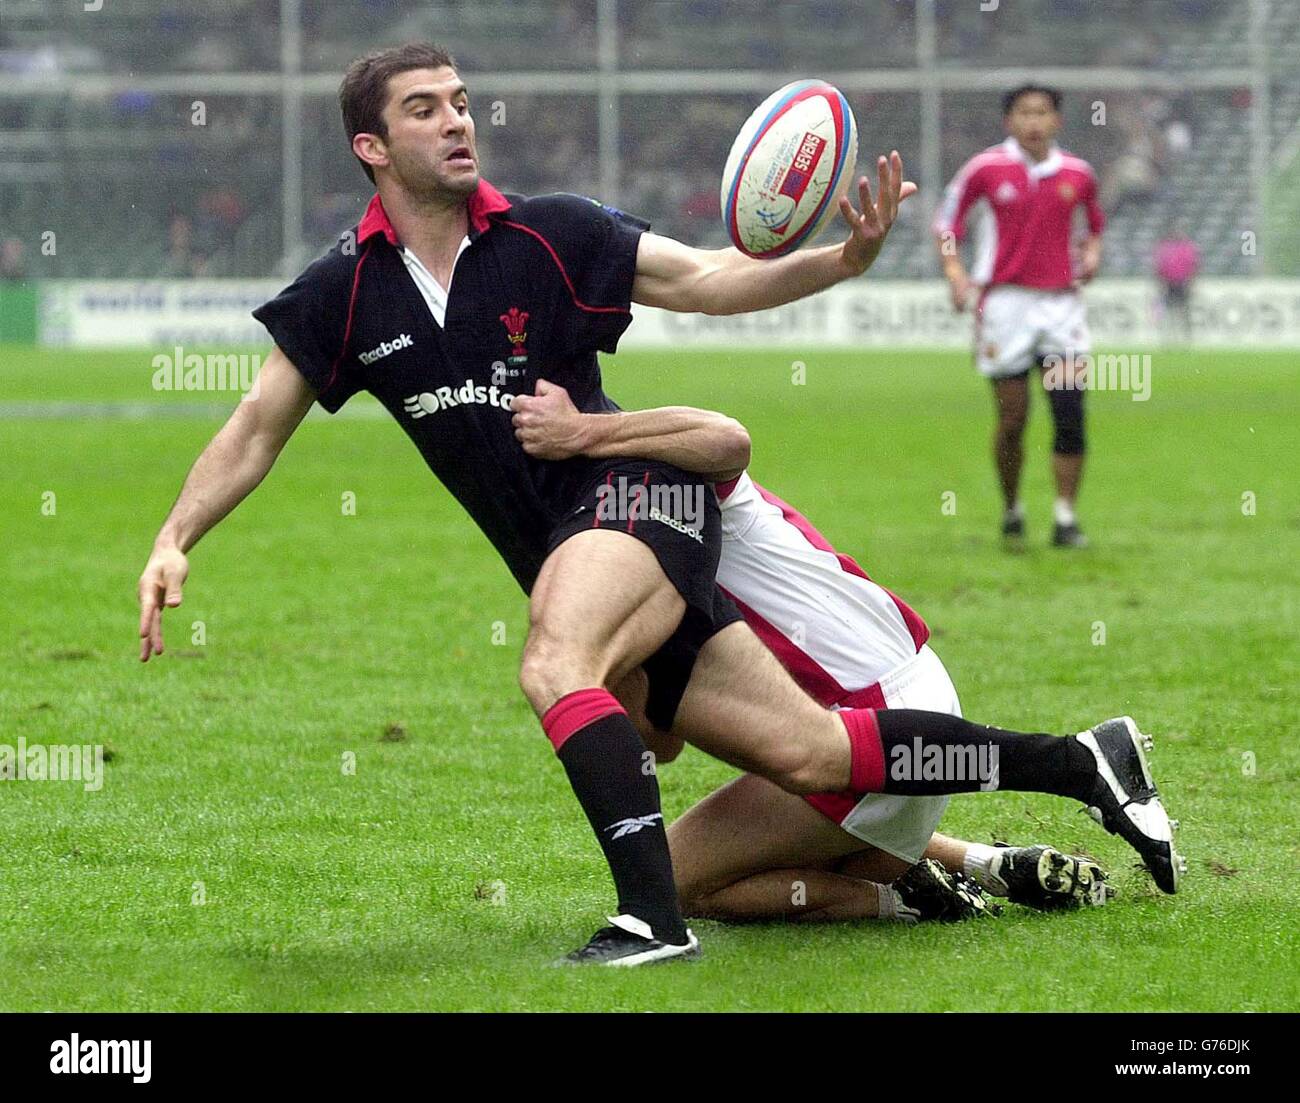 Wales v Singapore - Rugby Sevens. Wales' Gareth Baber is tackled by Singapore's Grant Rawlinson during Wales' 29-7 victory in the second round of the Hong Kong 'Sevens. Stock Photo